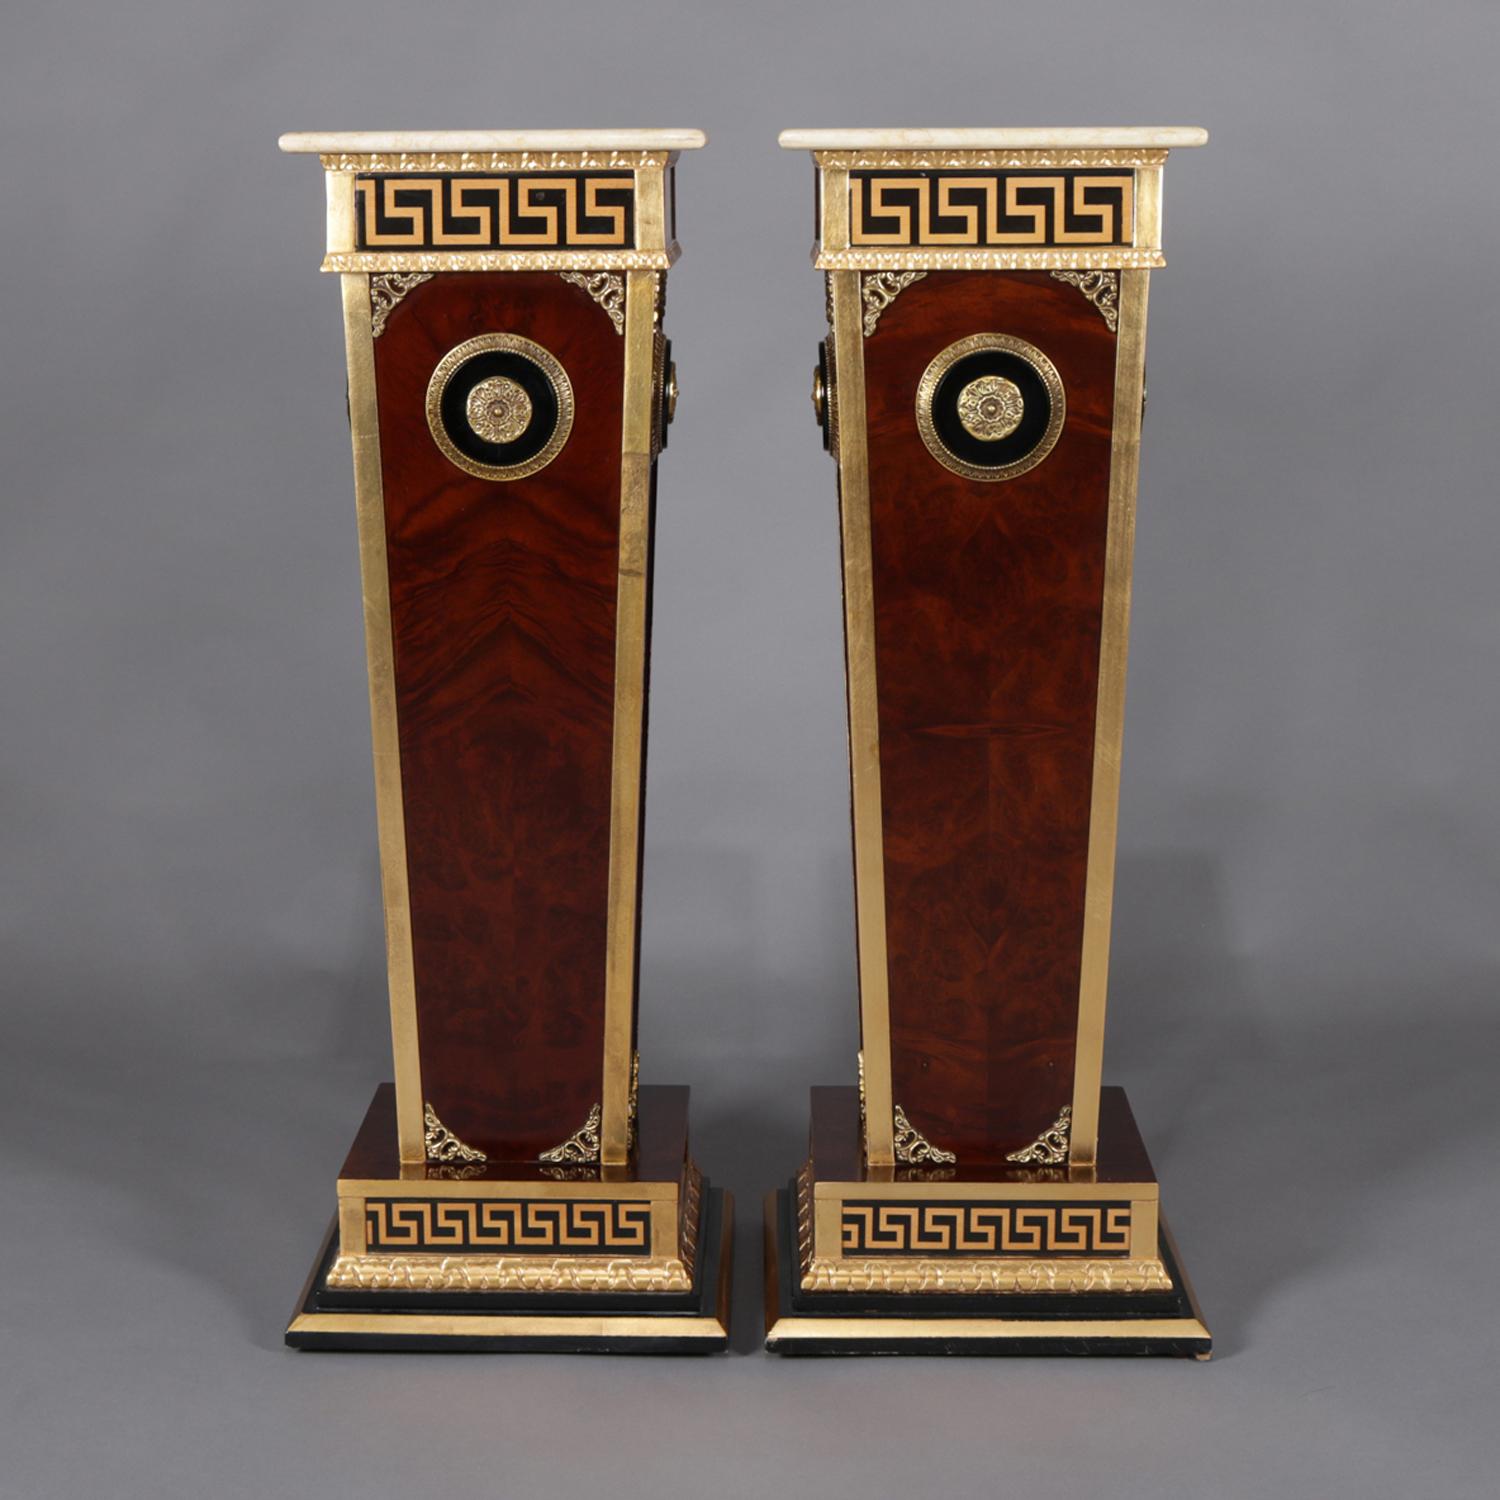 20th Century Pair of Matching Neoclassical Mahogany and Ormolu Sculpture Pedestals